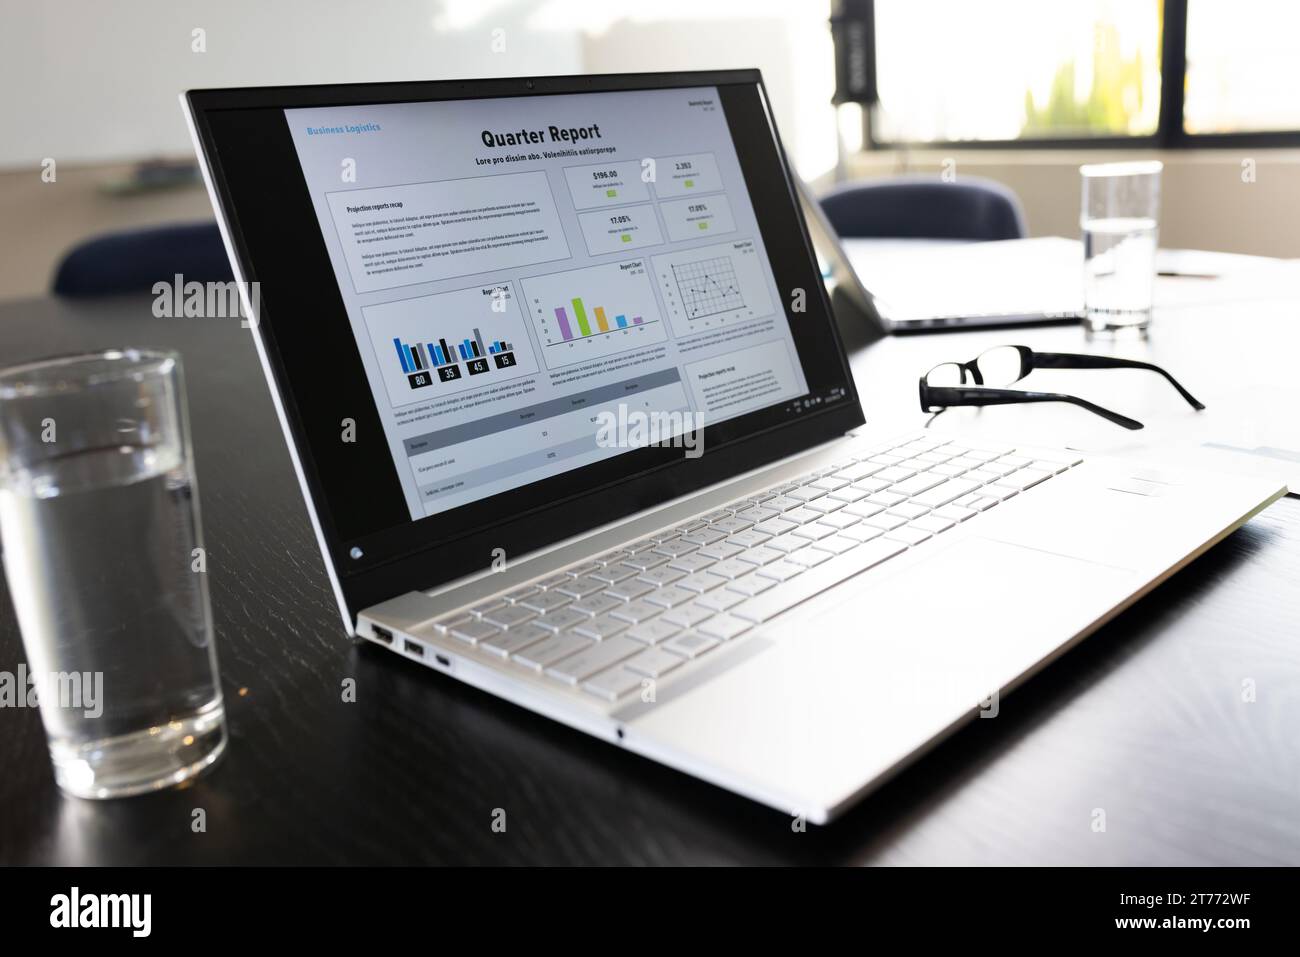 Laptop with quarter report text and graphs on screen on table in office meeting room Stock Photo